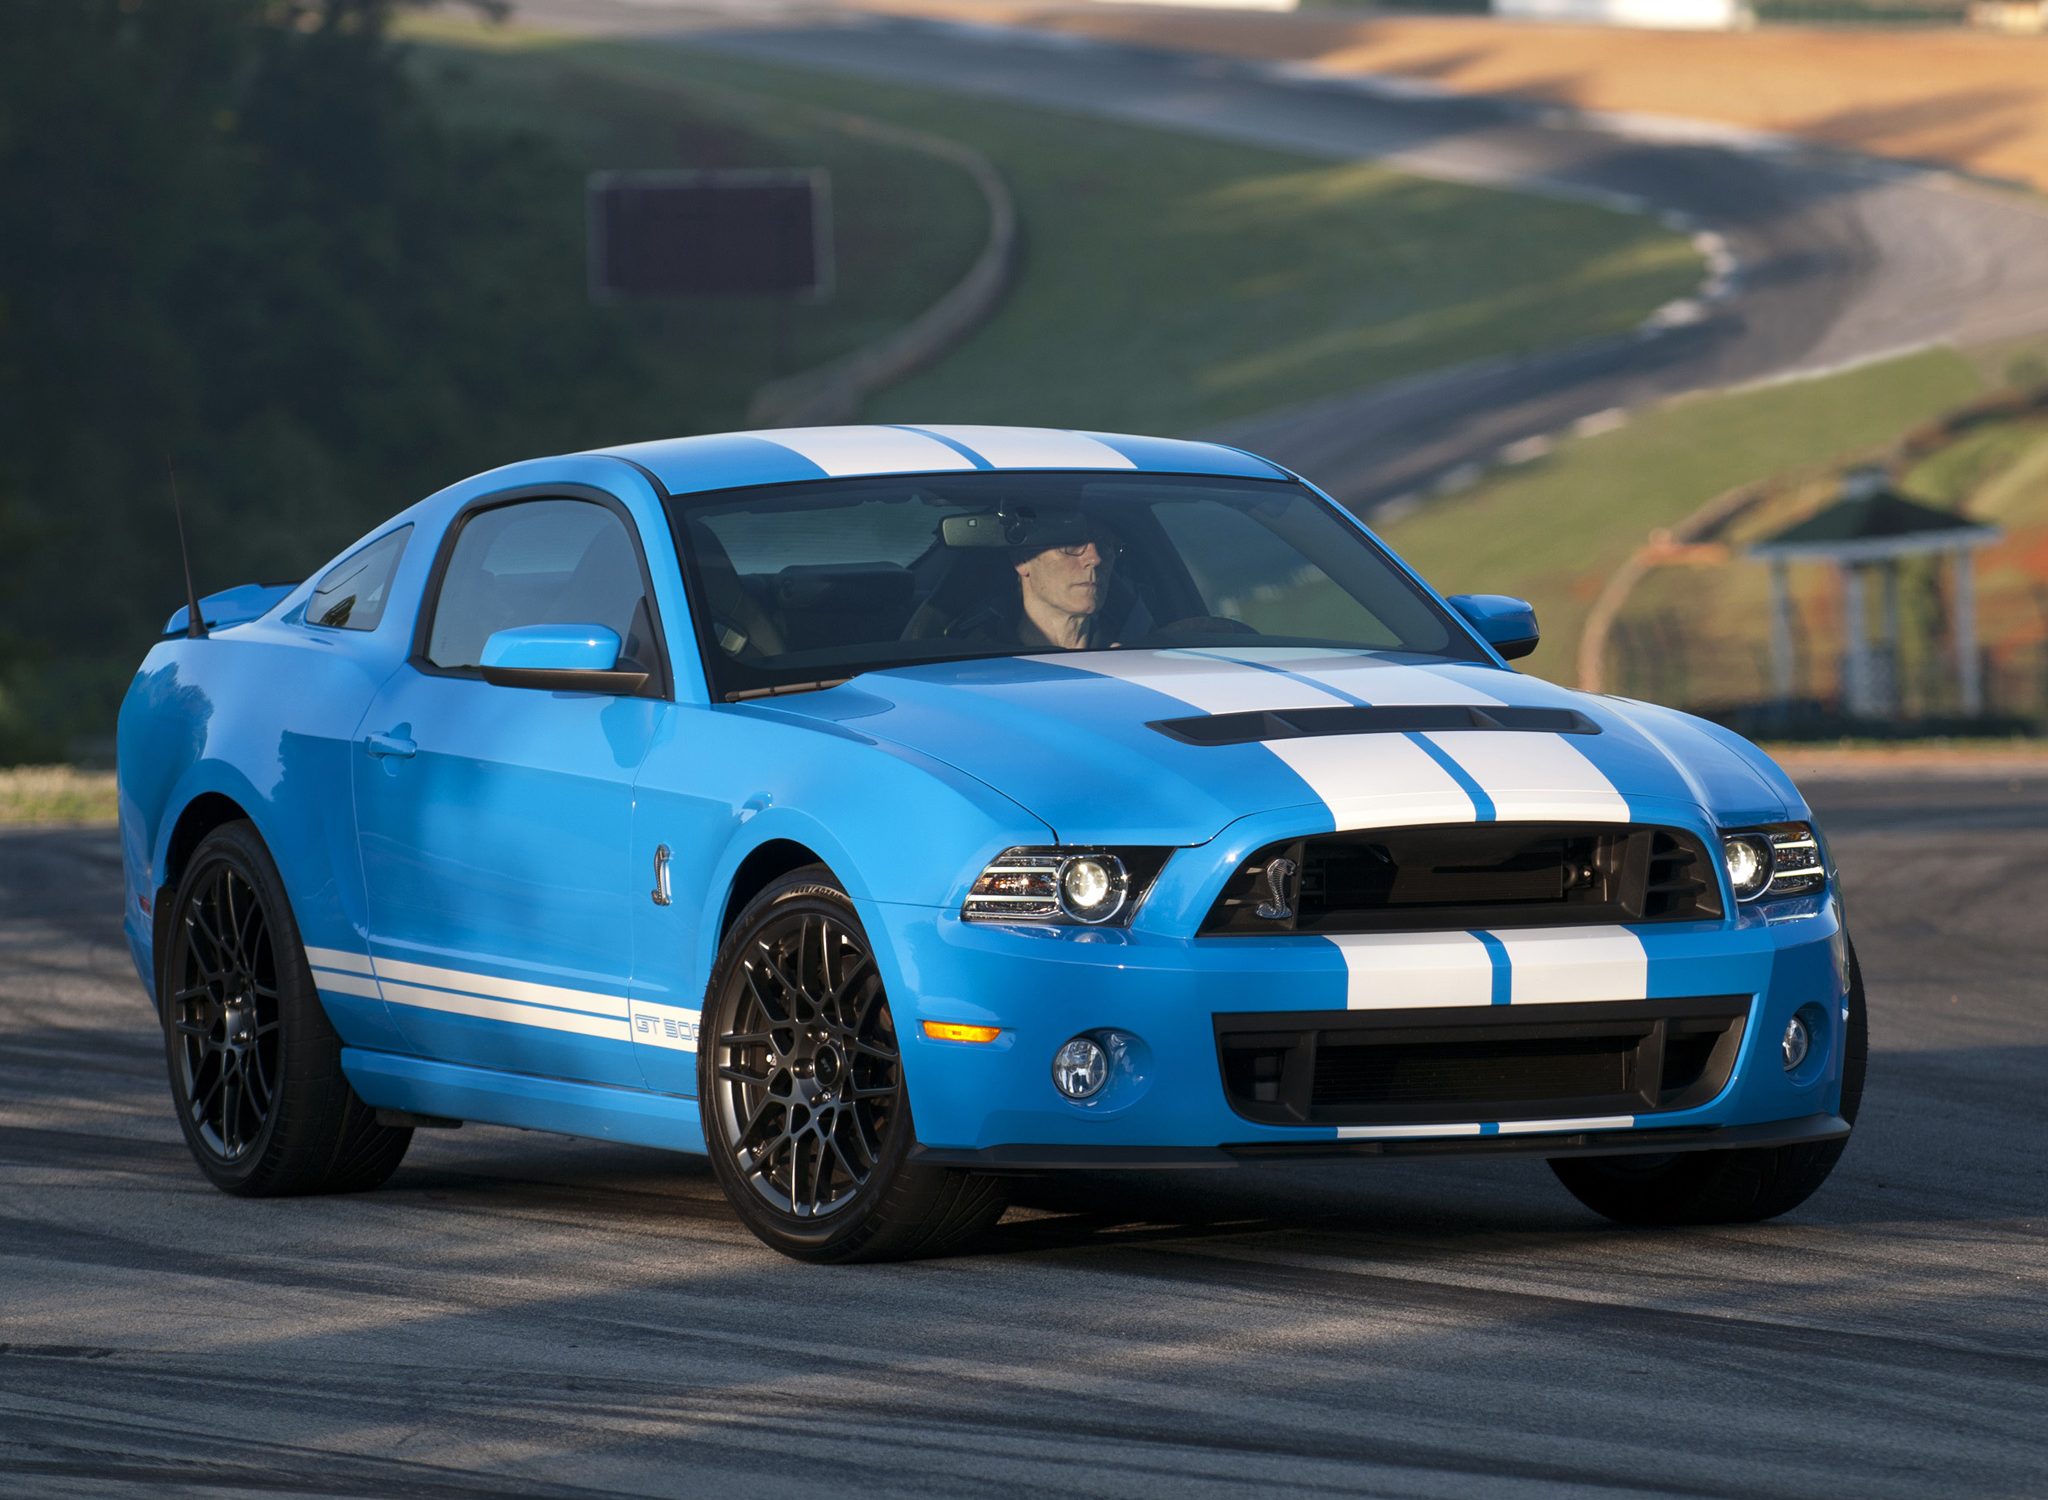 Mustang Of The Day: 2012 Ford Mustang Shelby GT500